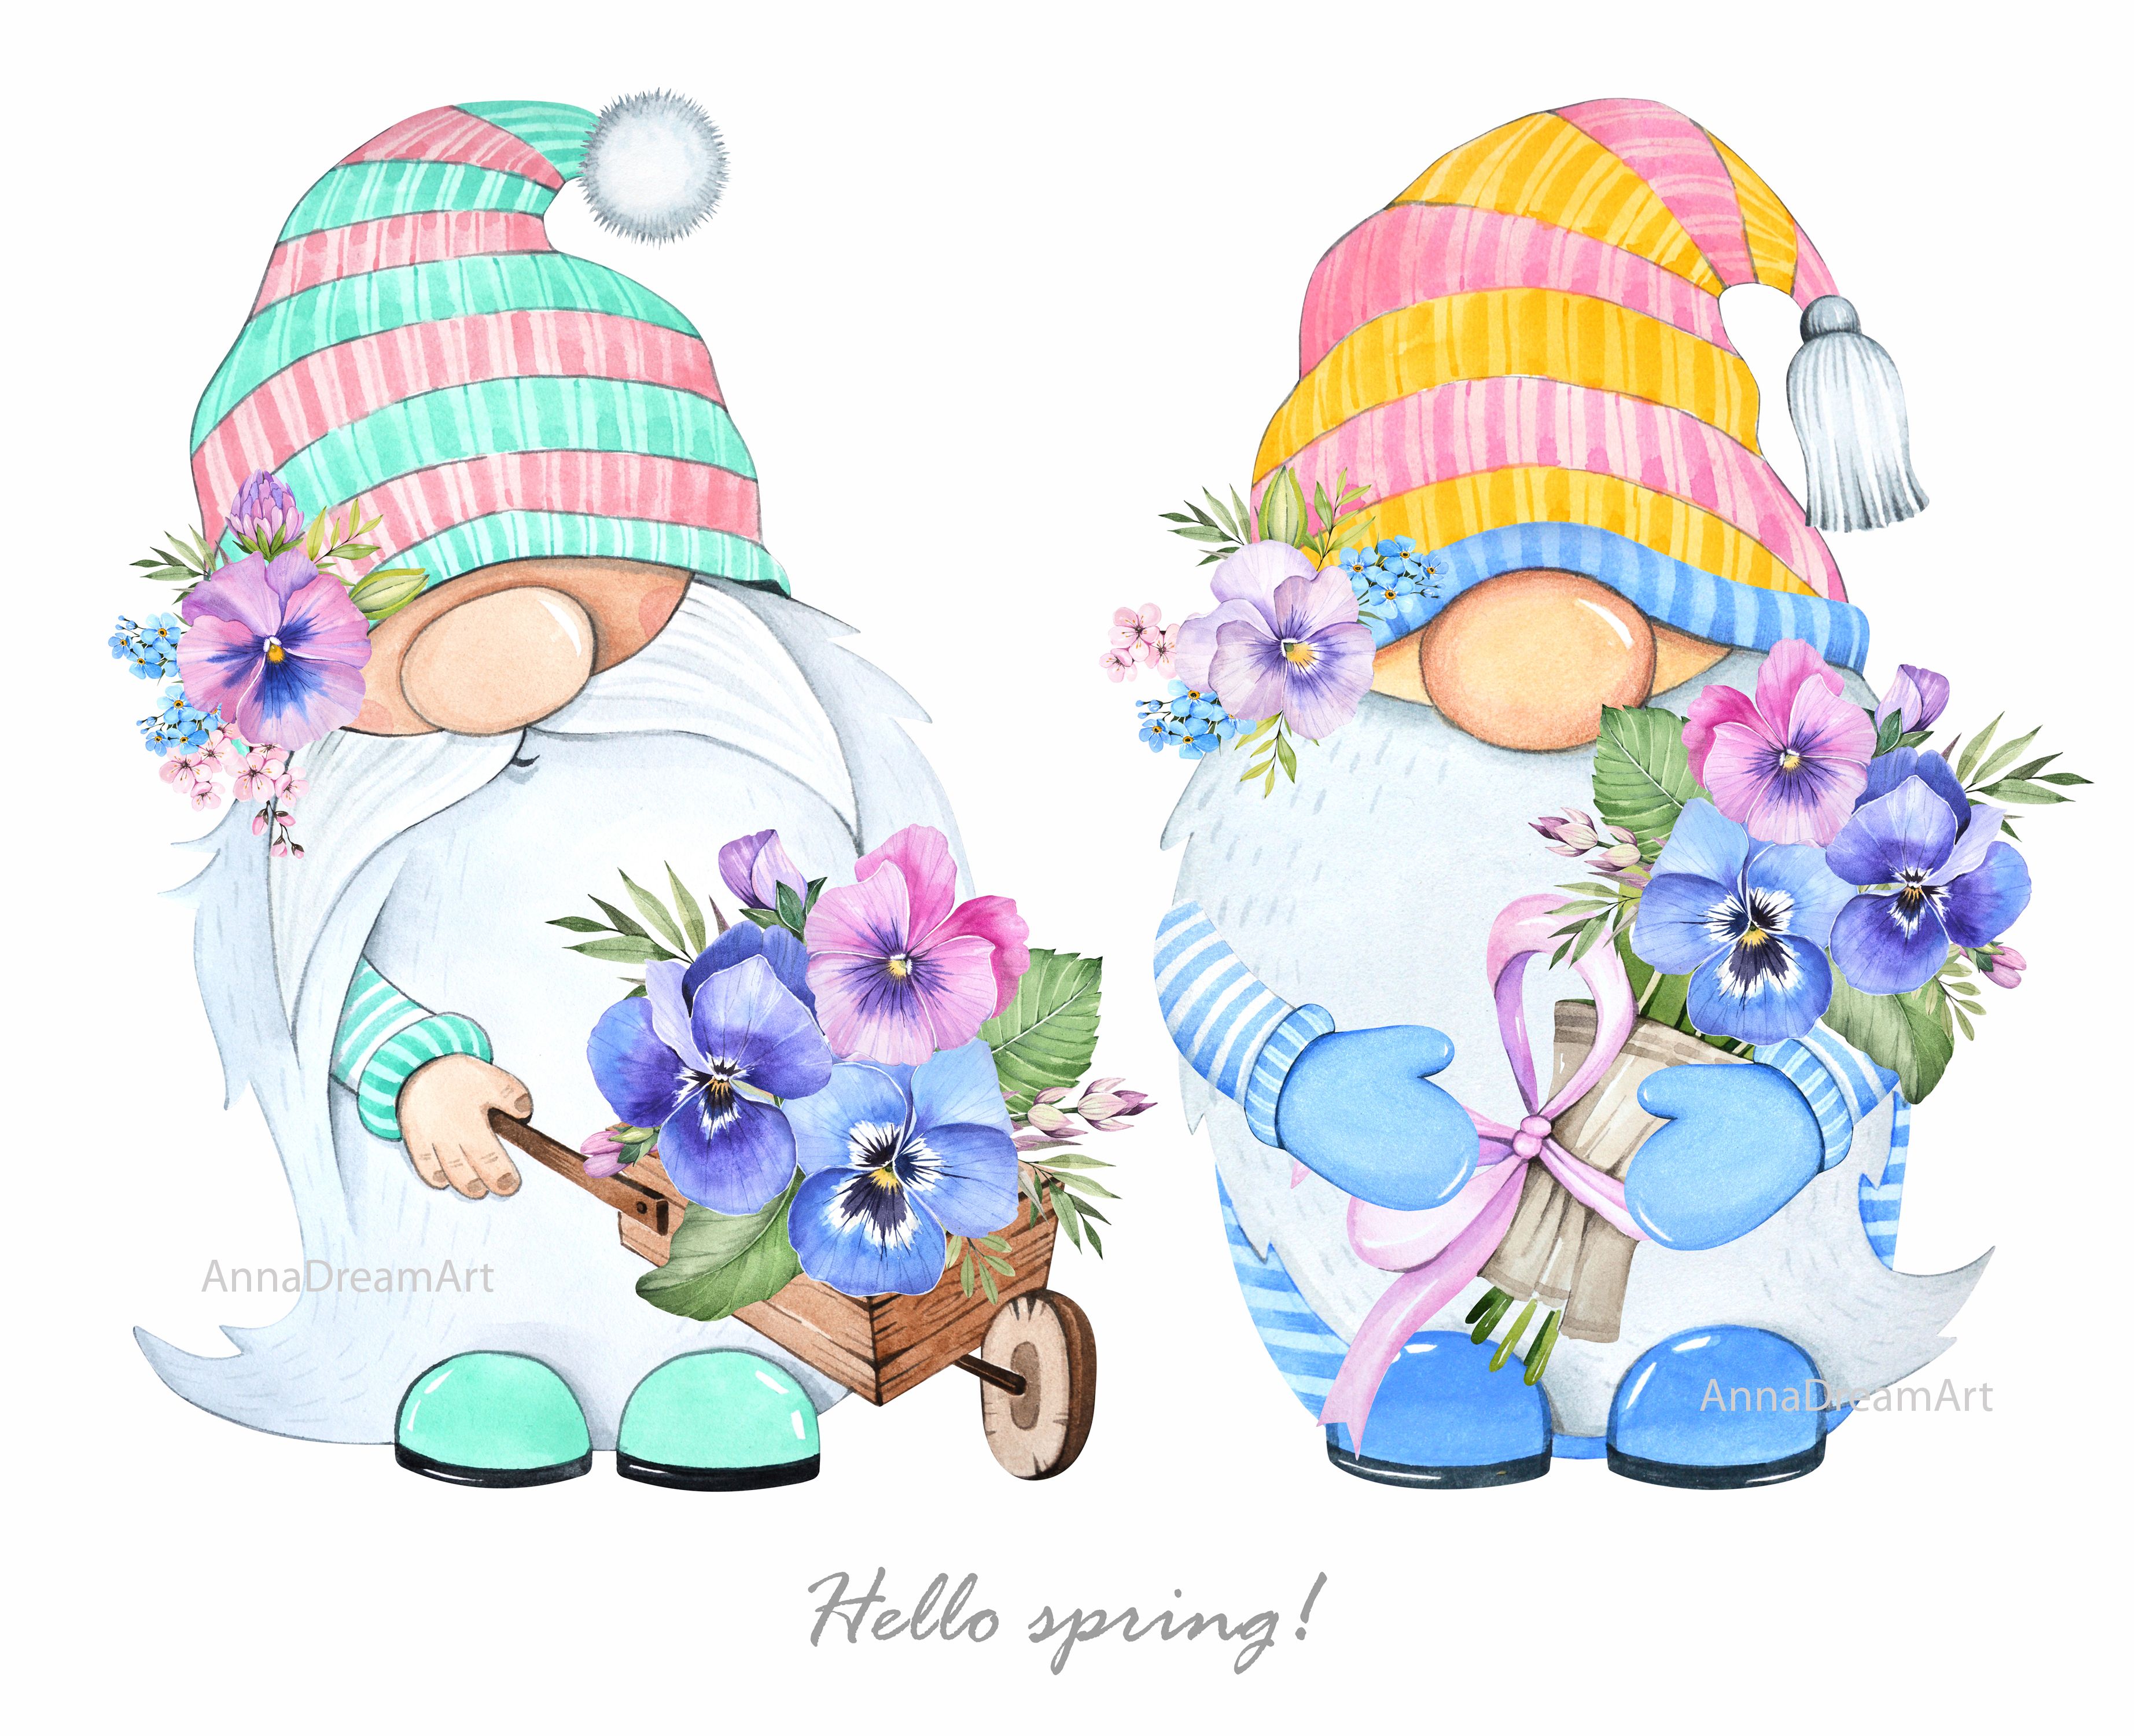 Cute spring gnomes on a white background. Pansy flowers. Watercolor illustration. Иллюстрации, Детские рисунки, Рождественские иллюстрации